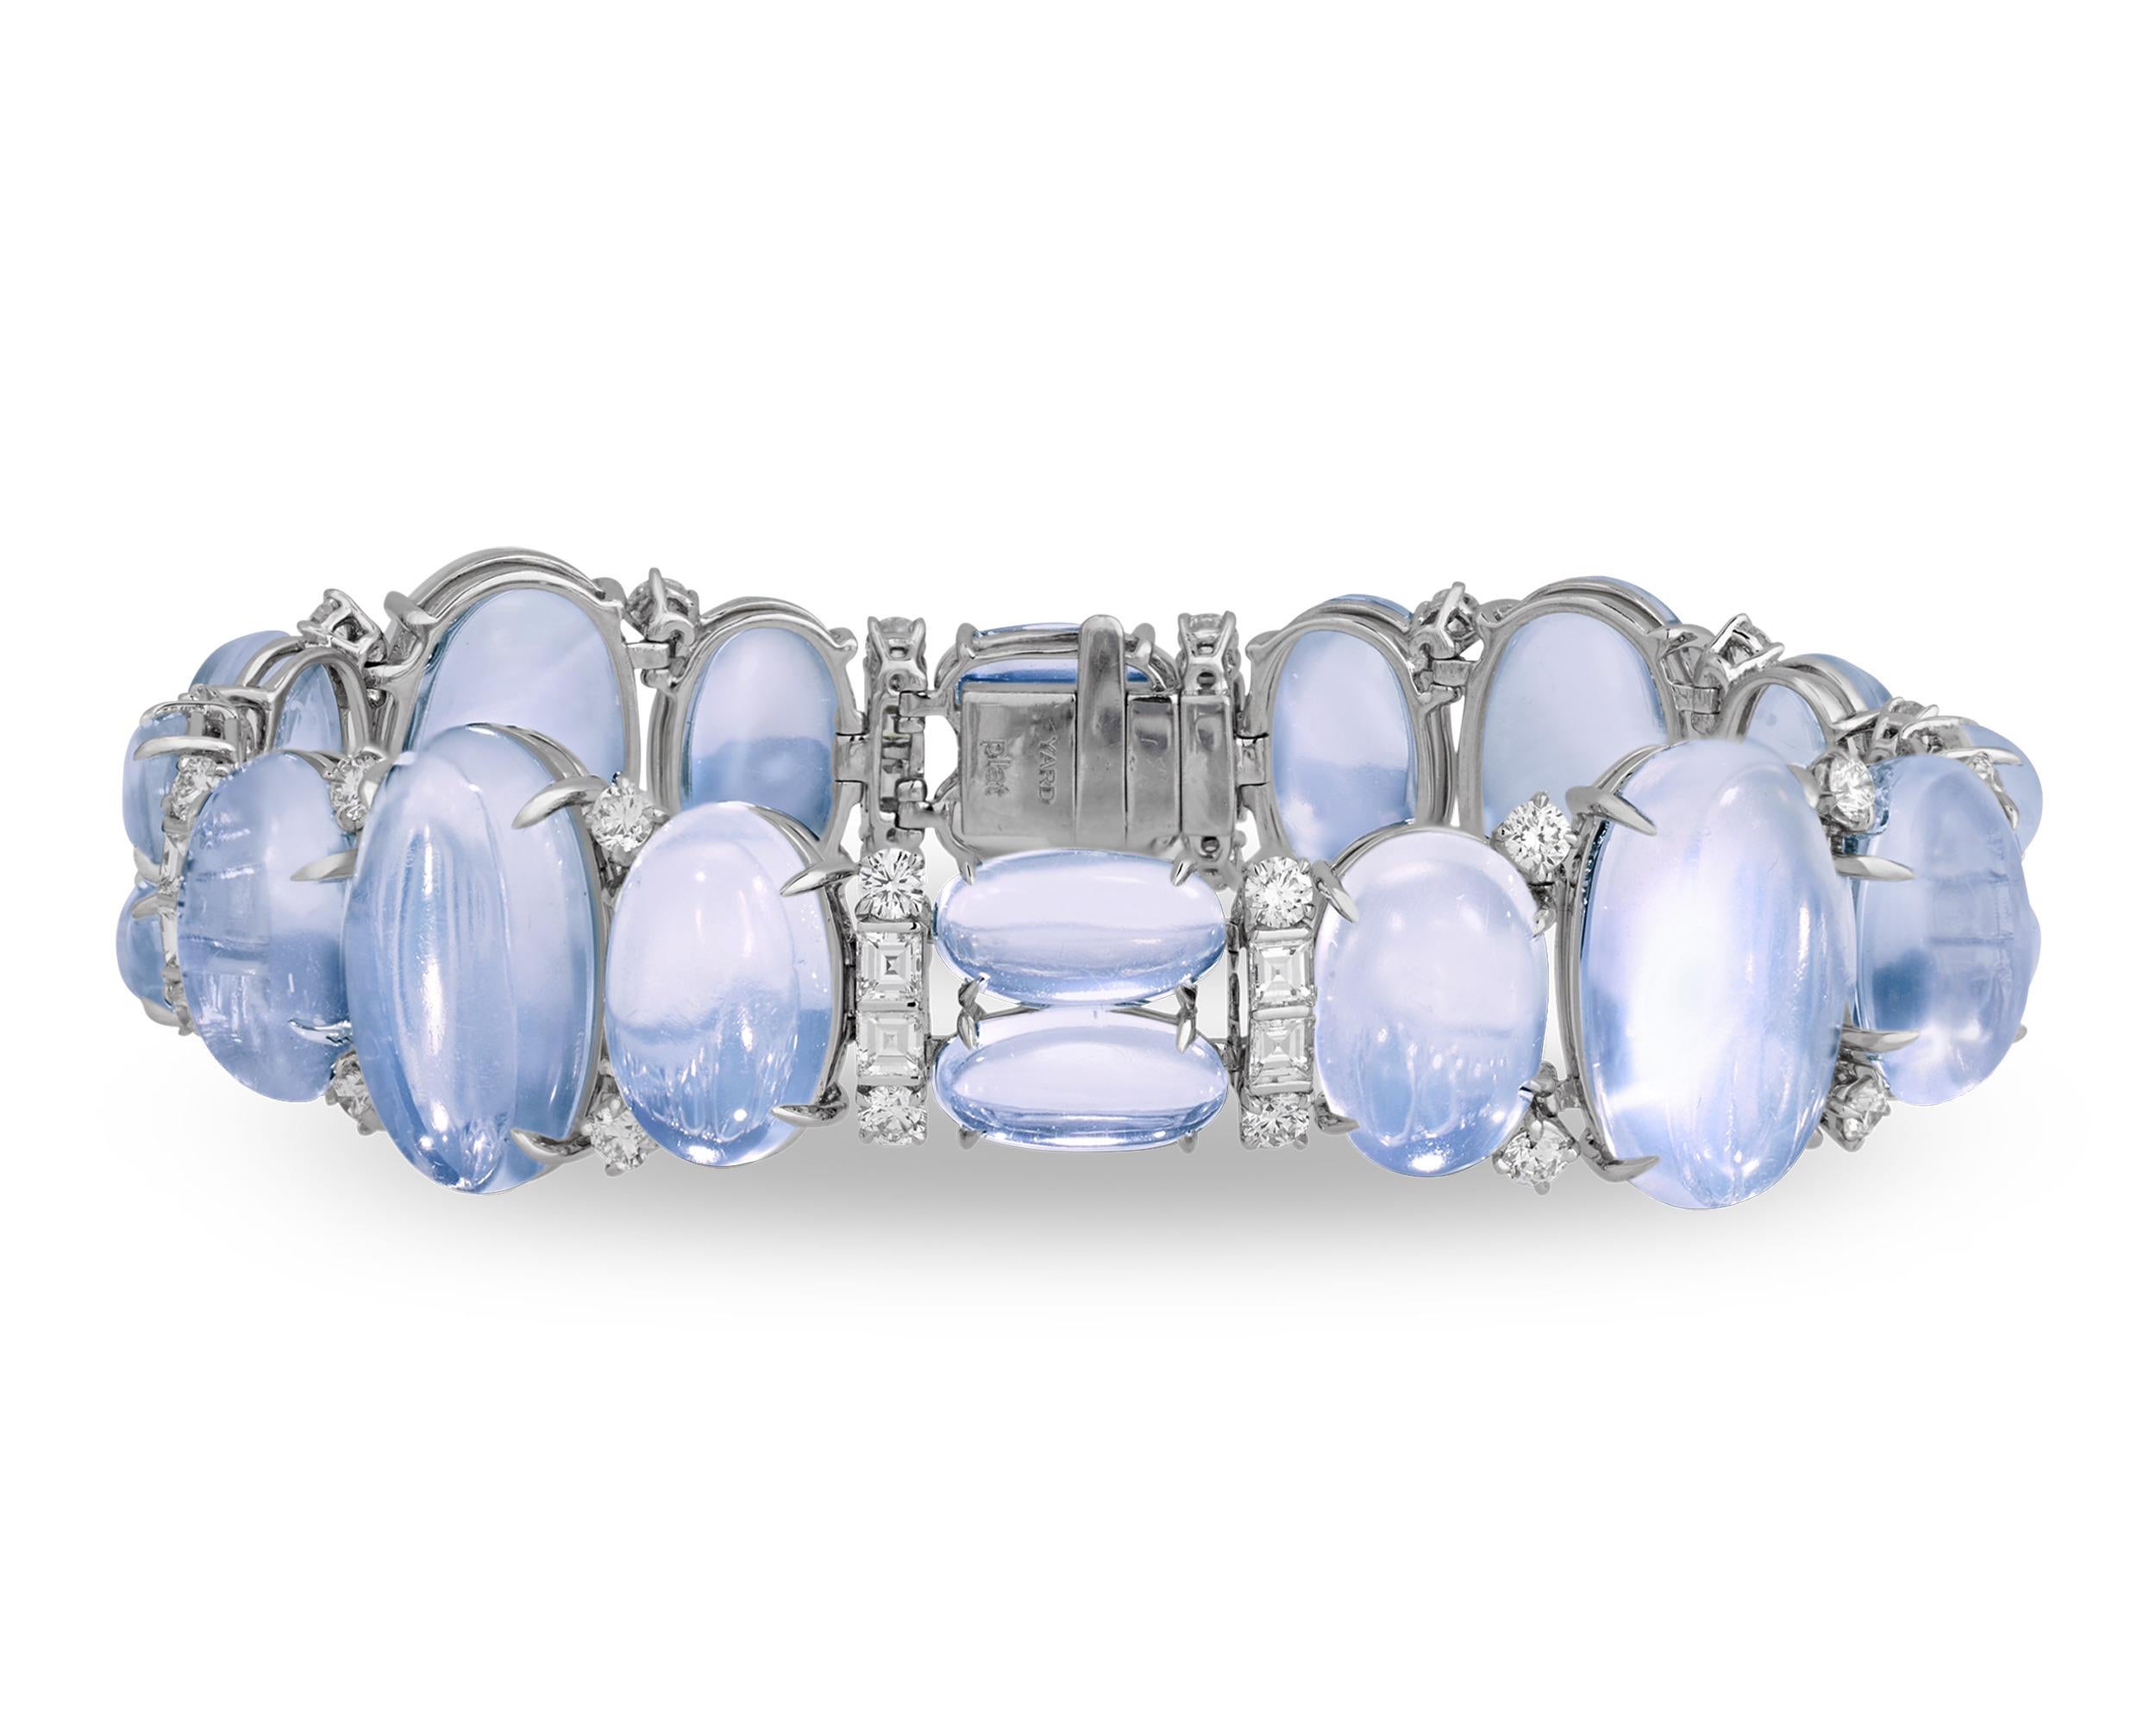 Luminous oval- and cushion-shaped moonstone beads are the stars of this Raymond Yard bracelet. Moonstone is a type of gemstone-quality variety of feldspar that is known for its pearl-like schiller, or iridescent luster. These particular moonstones,